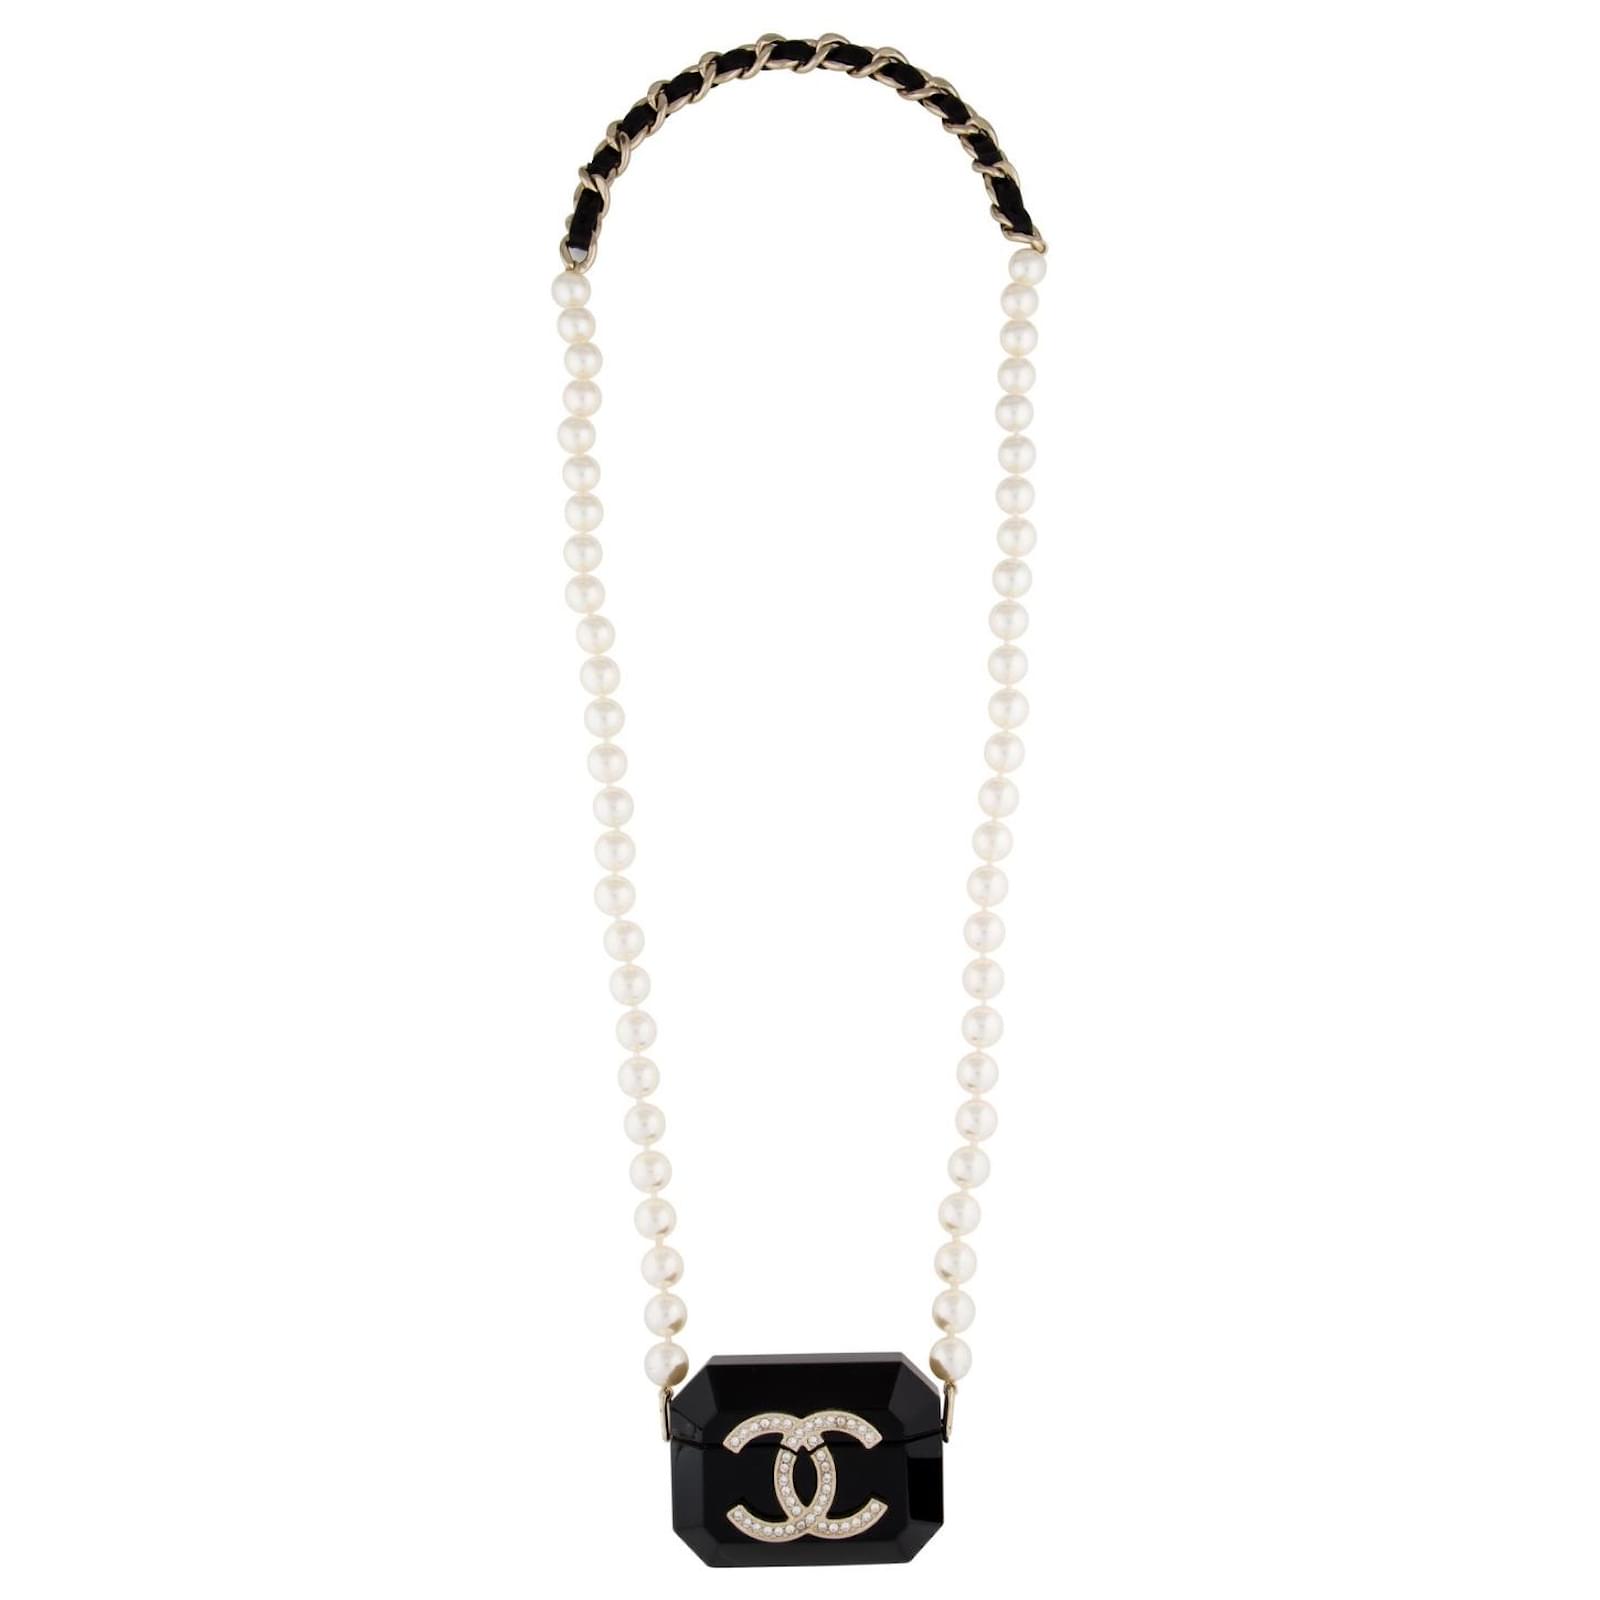 Chanel Lambskin Airpods Pro Case Necklace  DESIGNER TAKEAWAY BY QUEEN OF  LUXURY BOUTIQUE INC